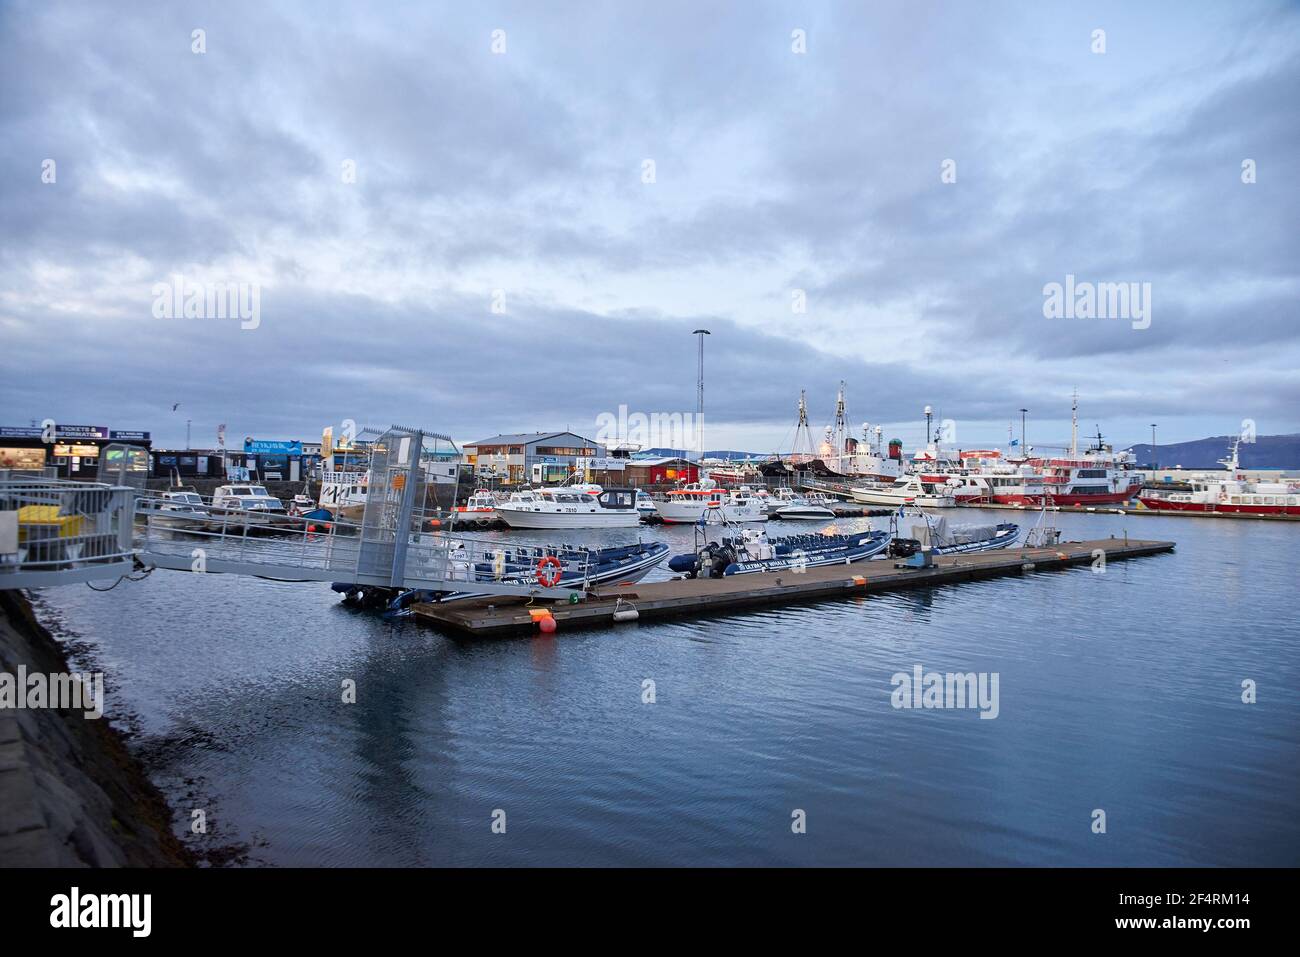 Reykjavik, Iceland - October 16, 2016: Many different boats and ships in the port of the city Stock Photo